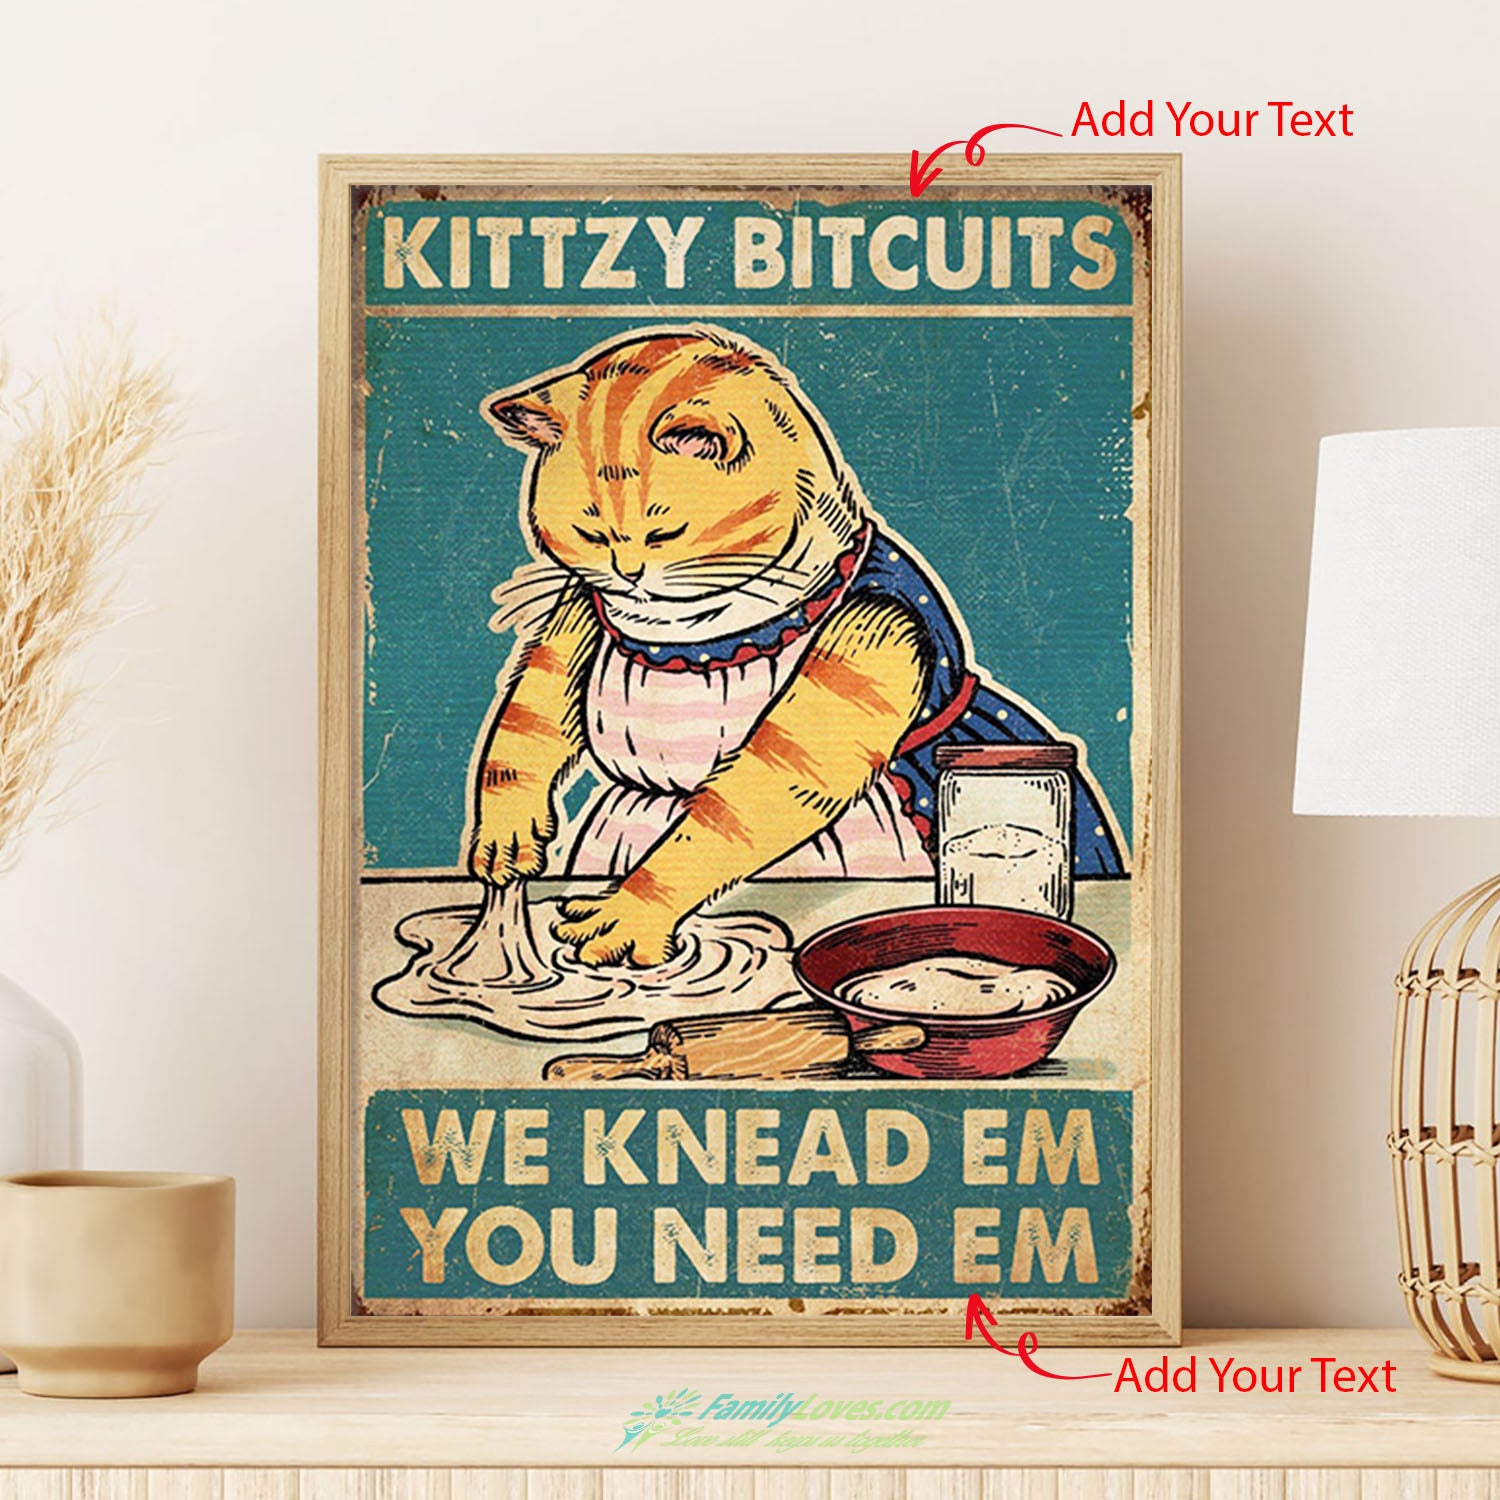 Kittzy Bitcuits We Knead Em You Need Em Framed Canvas Wall Art Poster Wall All Size 1